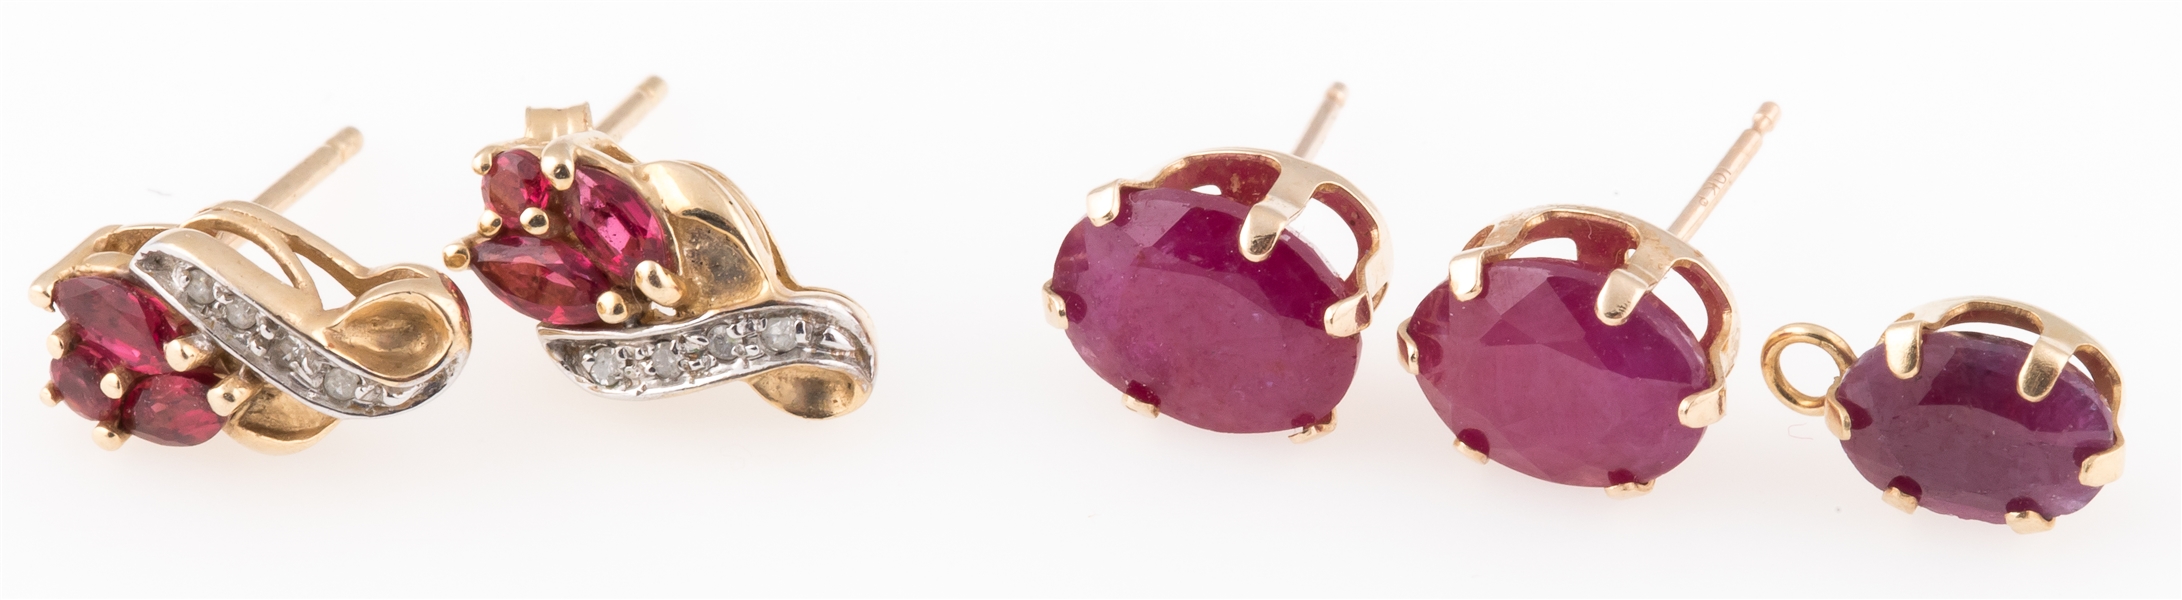 10K GOLD EARRINGS WITH GARNET AND RUBY